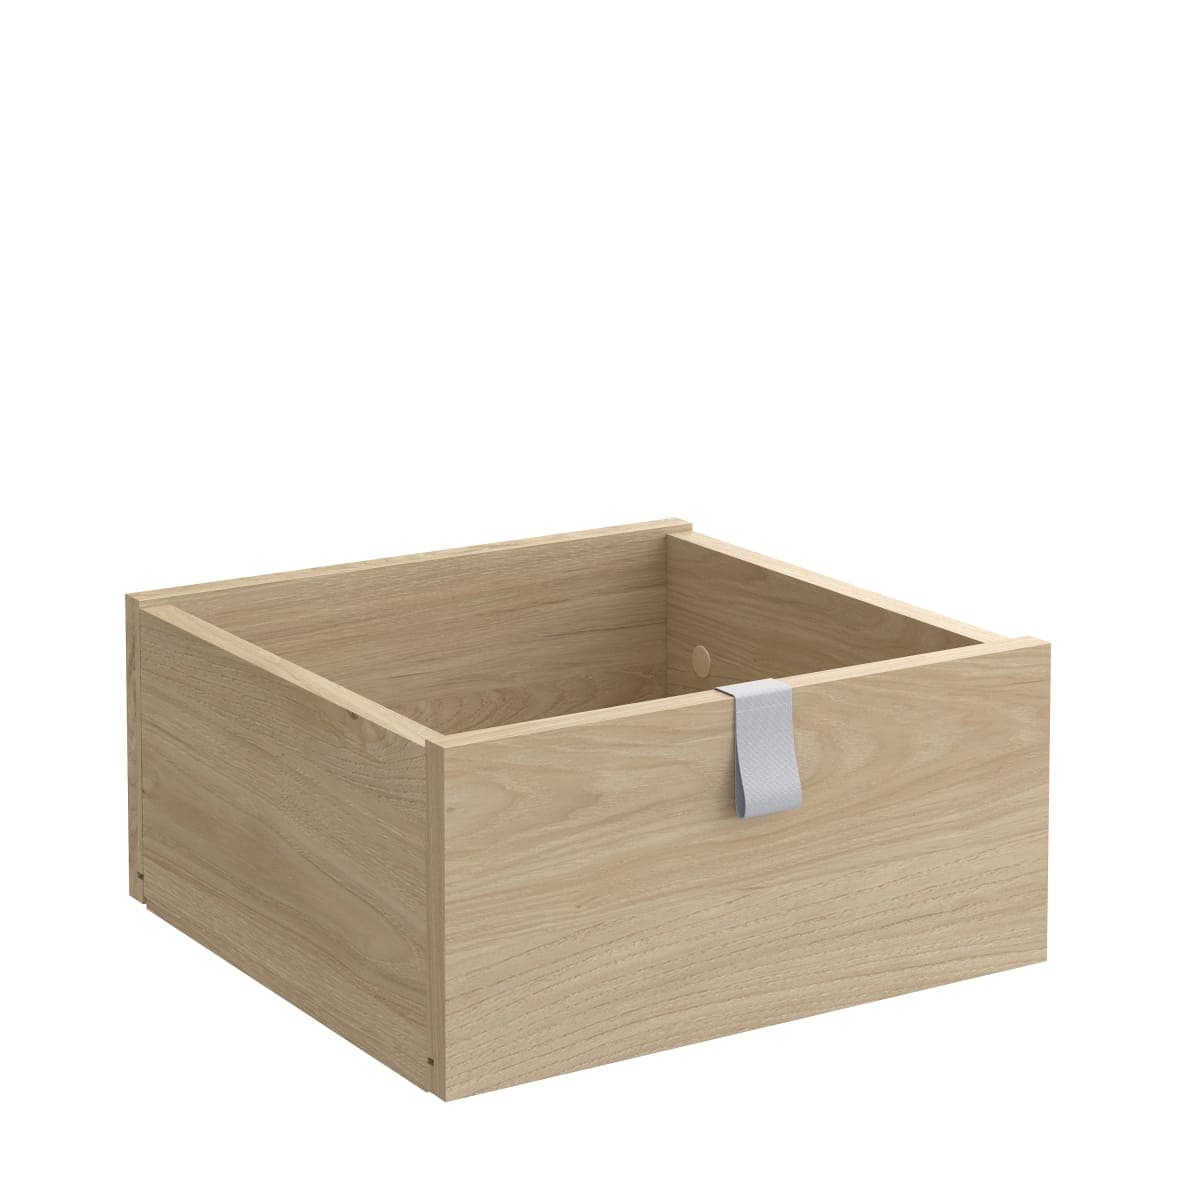 KUB SPACEO DRAWER L32.4xP31.6xH15CM IN WOOD IN OAK COLOUR